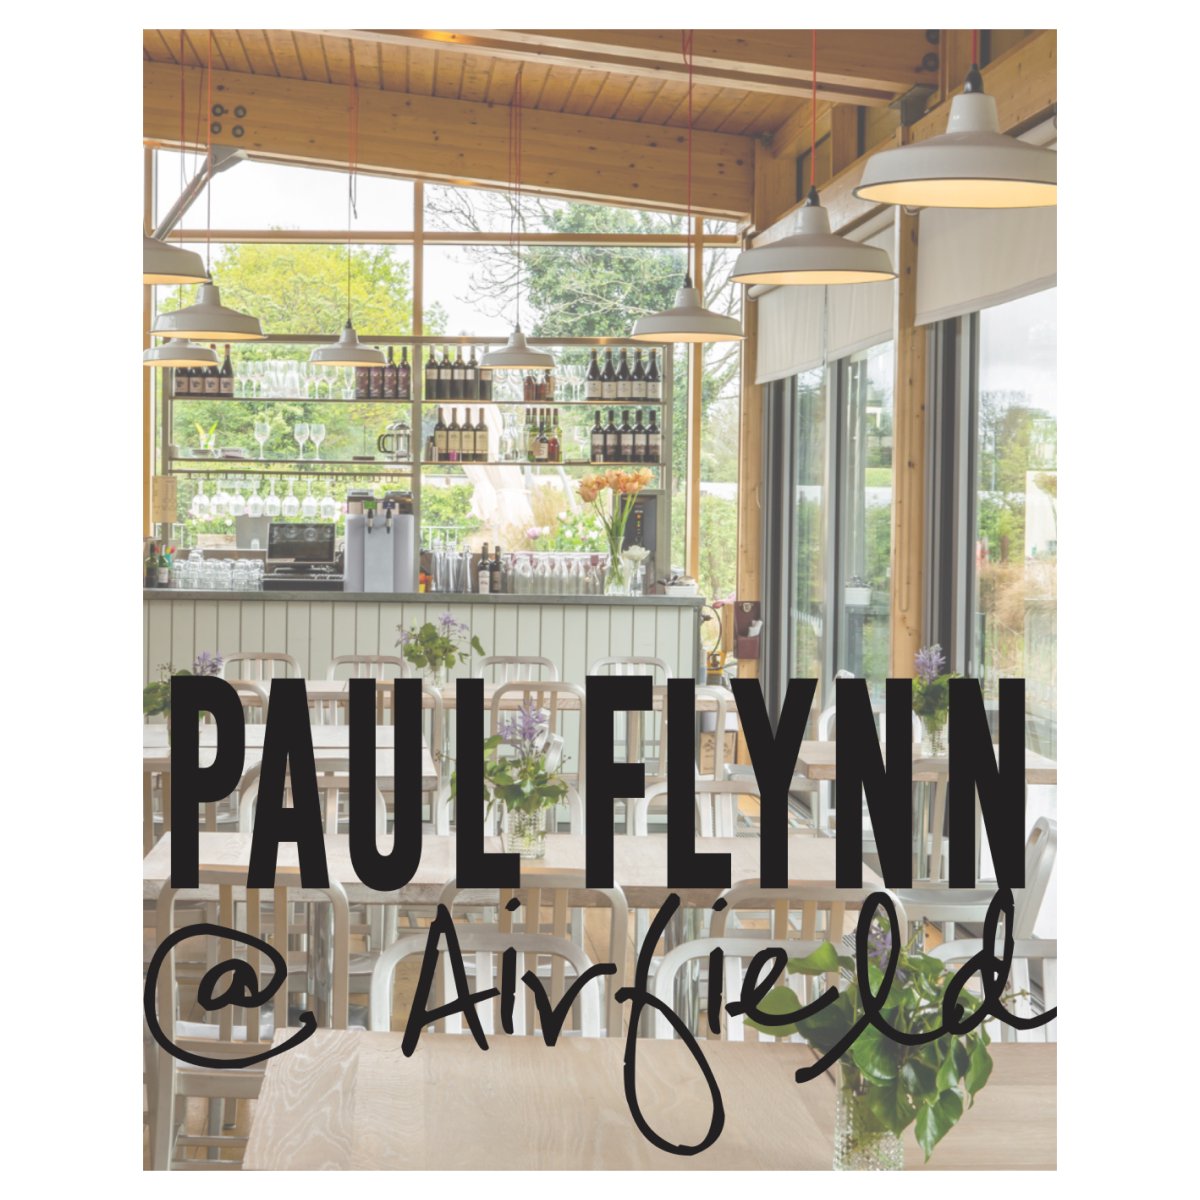 Don't miss your chance to meet @paulflynnchef in Dublin! He'll be cooking dishes from his forthcoming book, BUTTER BOY. 🧈 What: Two special evenings with Paul Flynn 🧈 Where: Overends Kitchen, Airfield Estate, Dublin 🧈 When: August 25th and 26th airfield.ie/events/paul-fl…